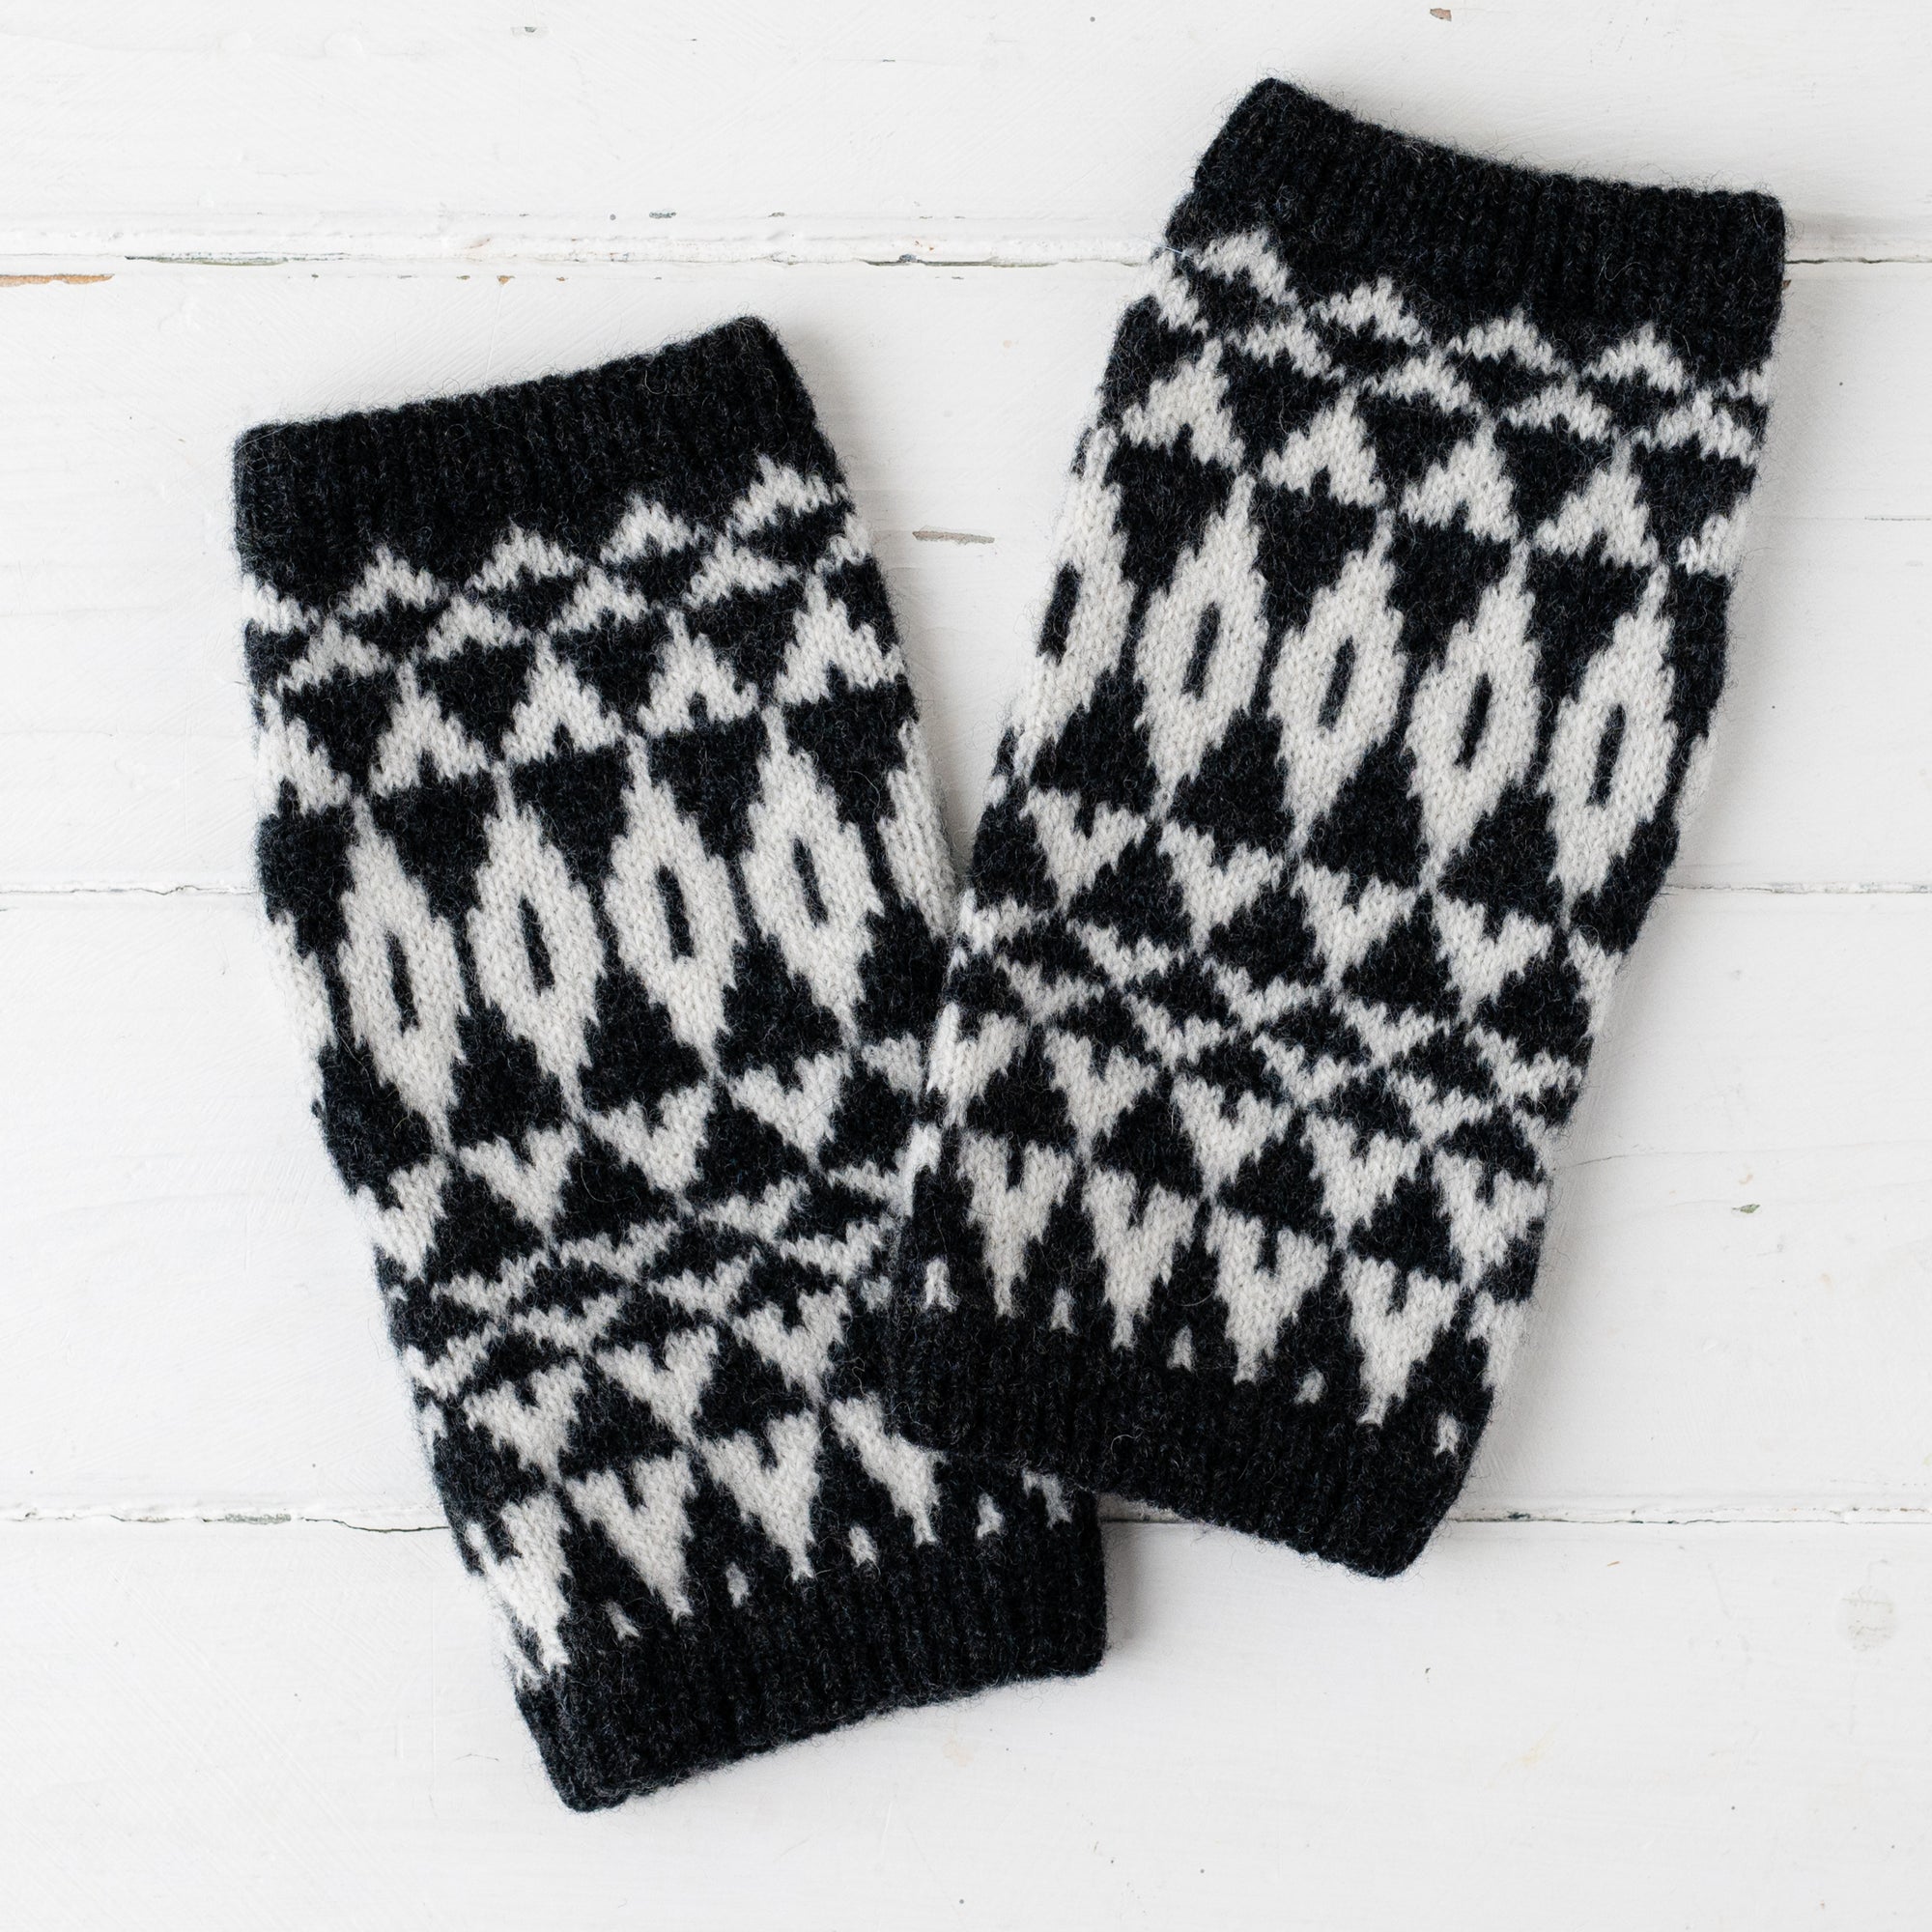 Mirror wrist warmers - monochrome (MADE TO ORDER)